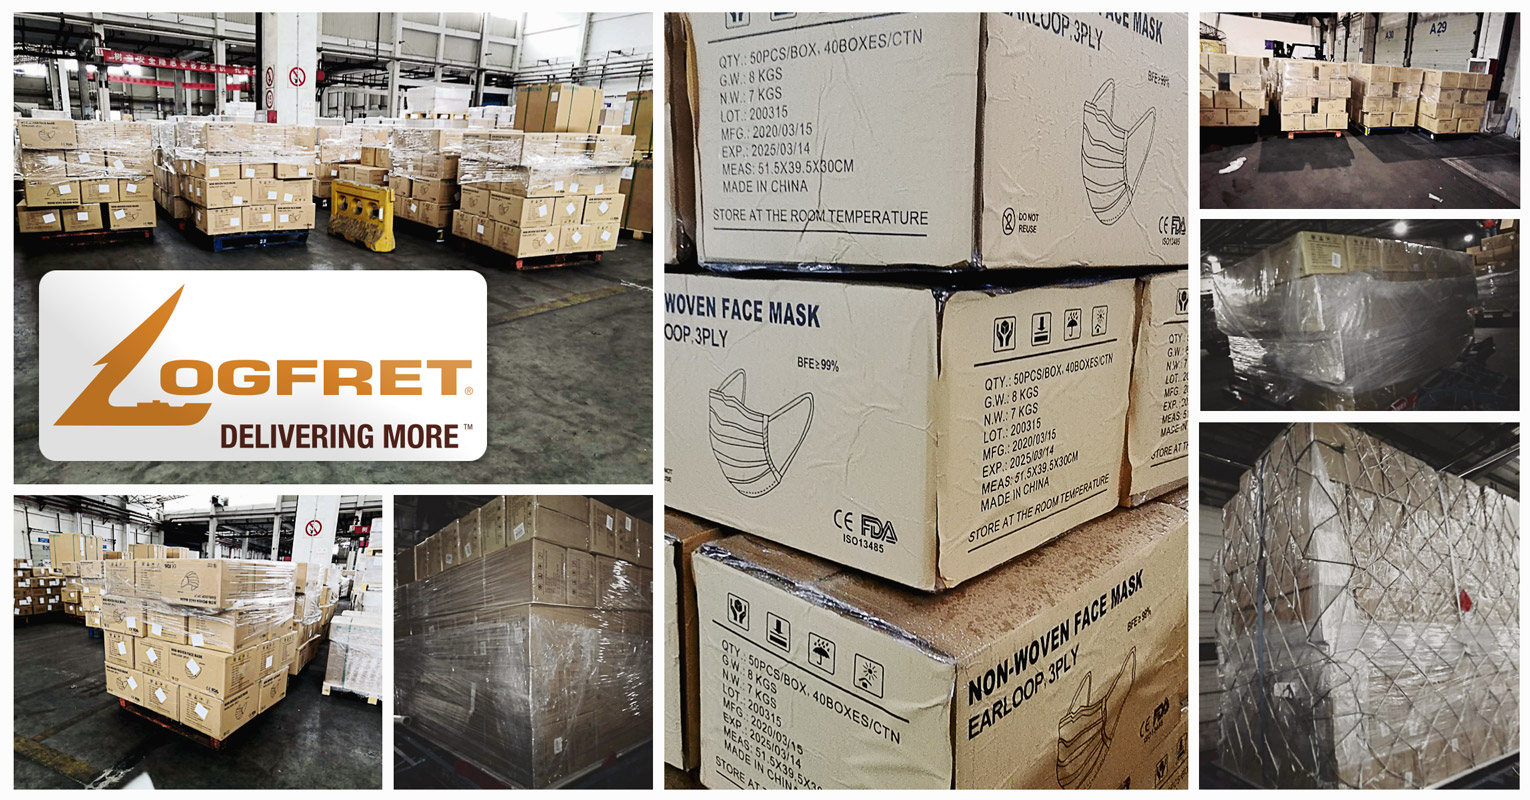 Logfret Poland Moves 900CBM in just 3 Weeks from China to Poland